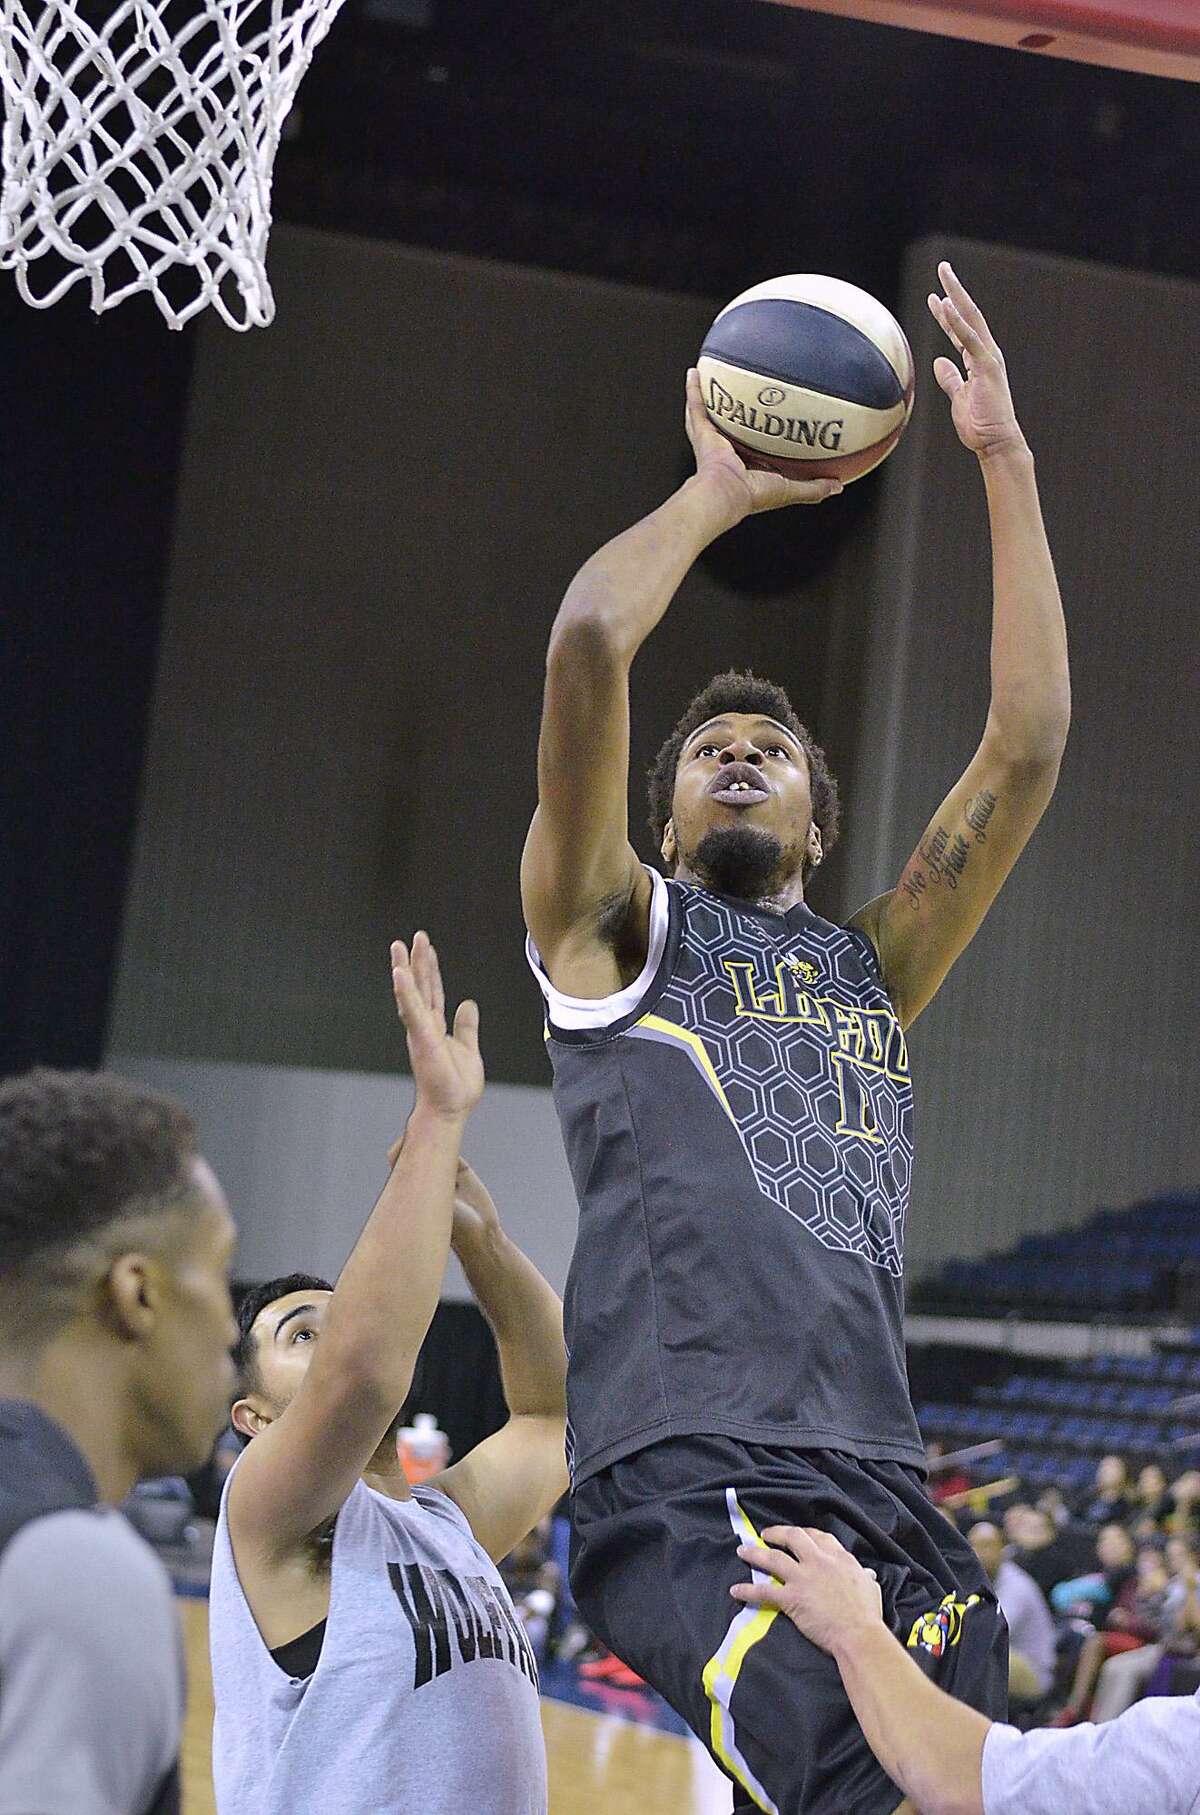 Devonte Robinson finished with 25 points and nine rebounds as the Swarm beat the Wolfpack 161-87 Wednesday night. It was the third most points scored for Laredo in team history.